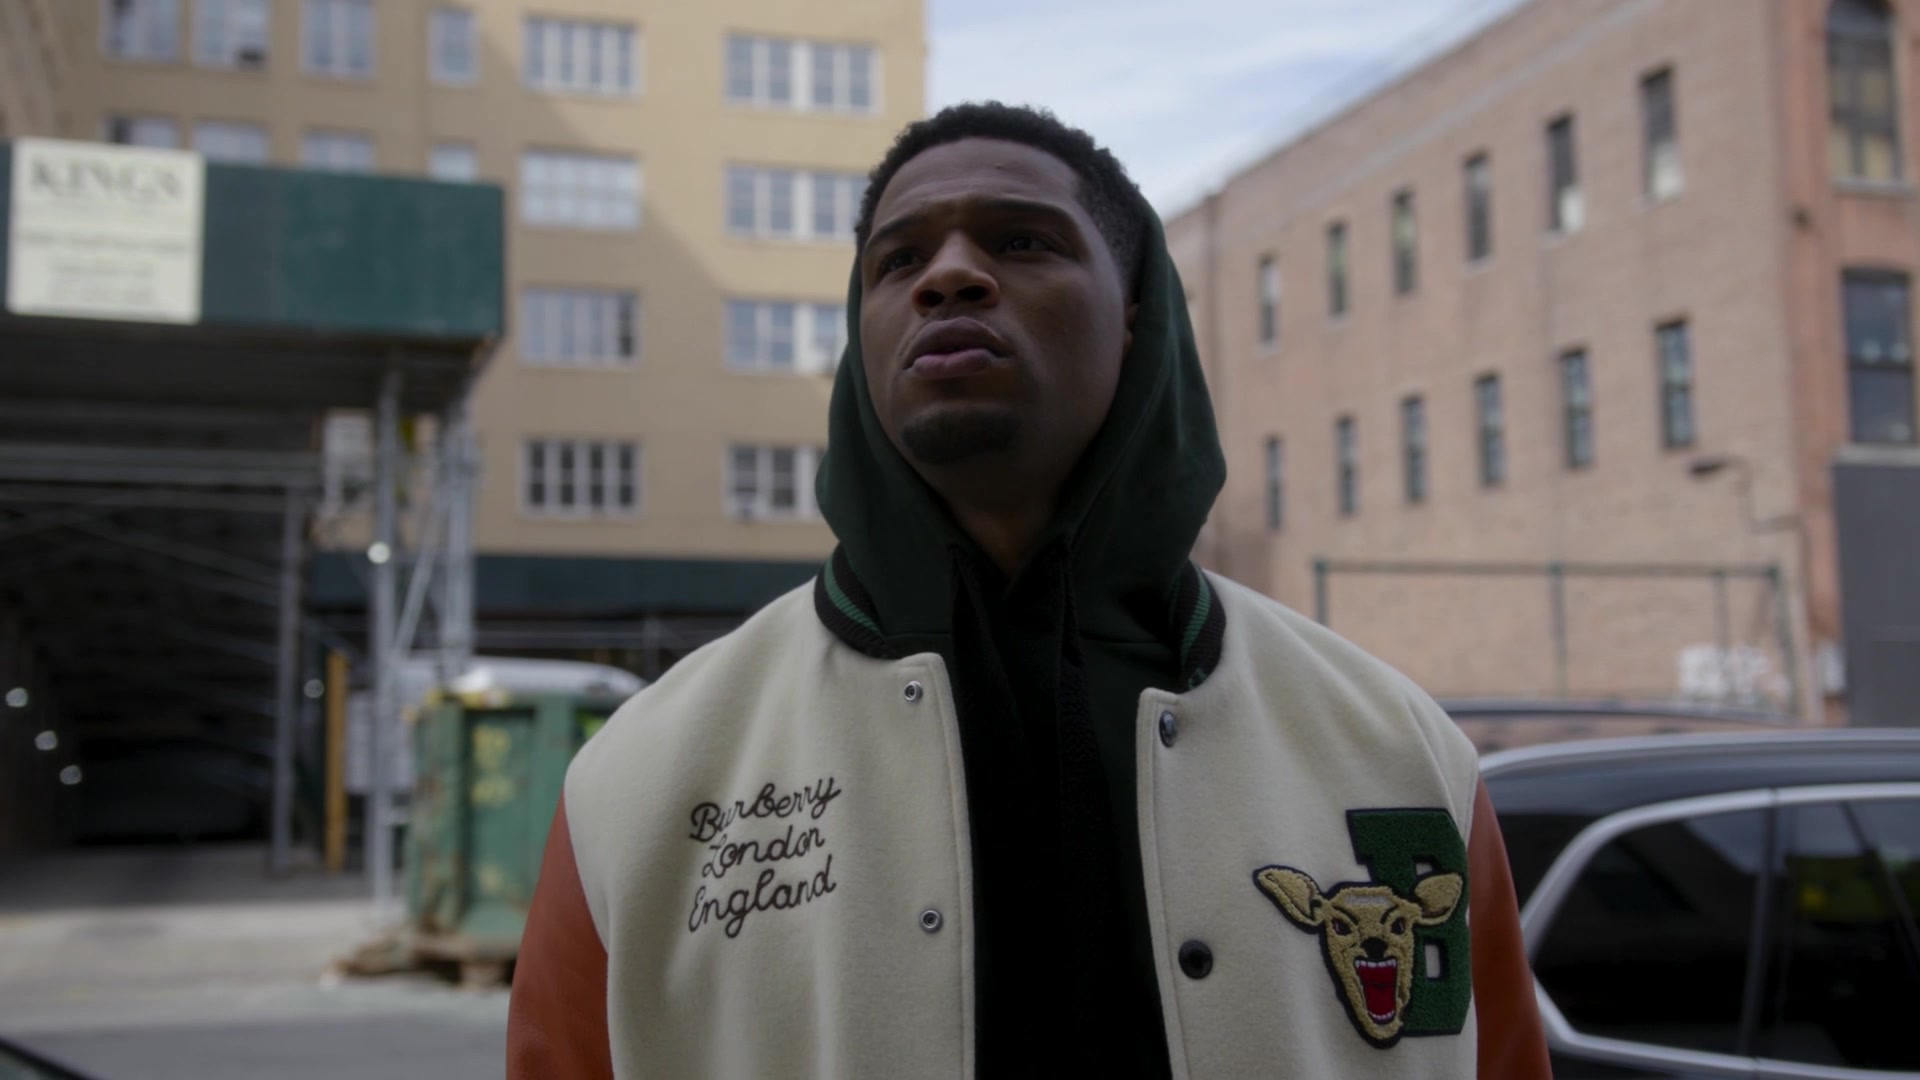 Burberry Men's Jacket In Book Ghost S02E02 "Selfless Acts?"